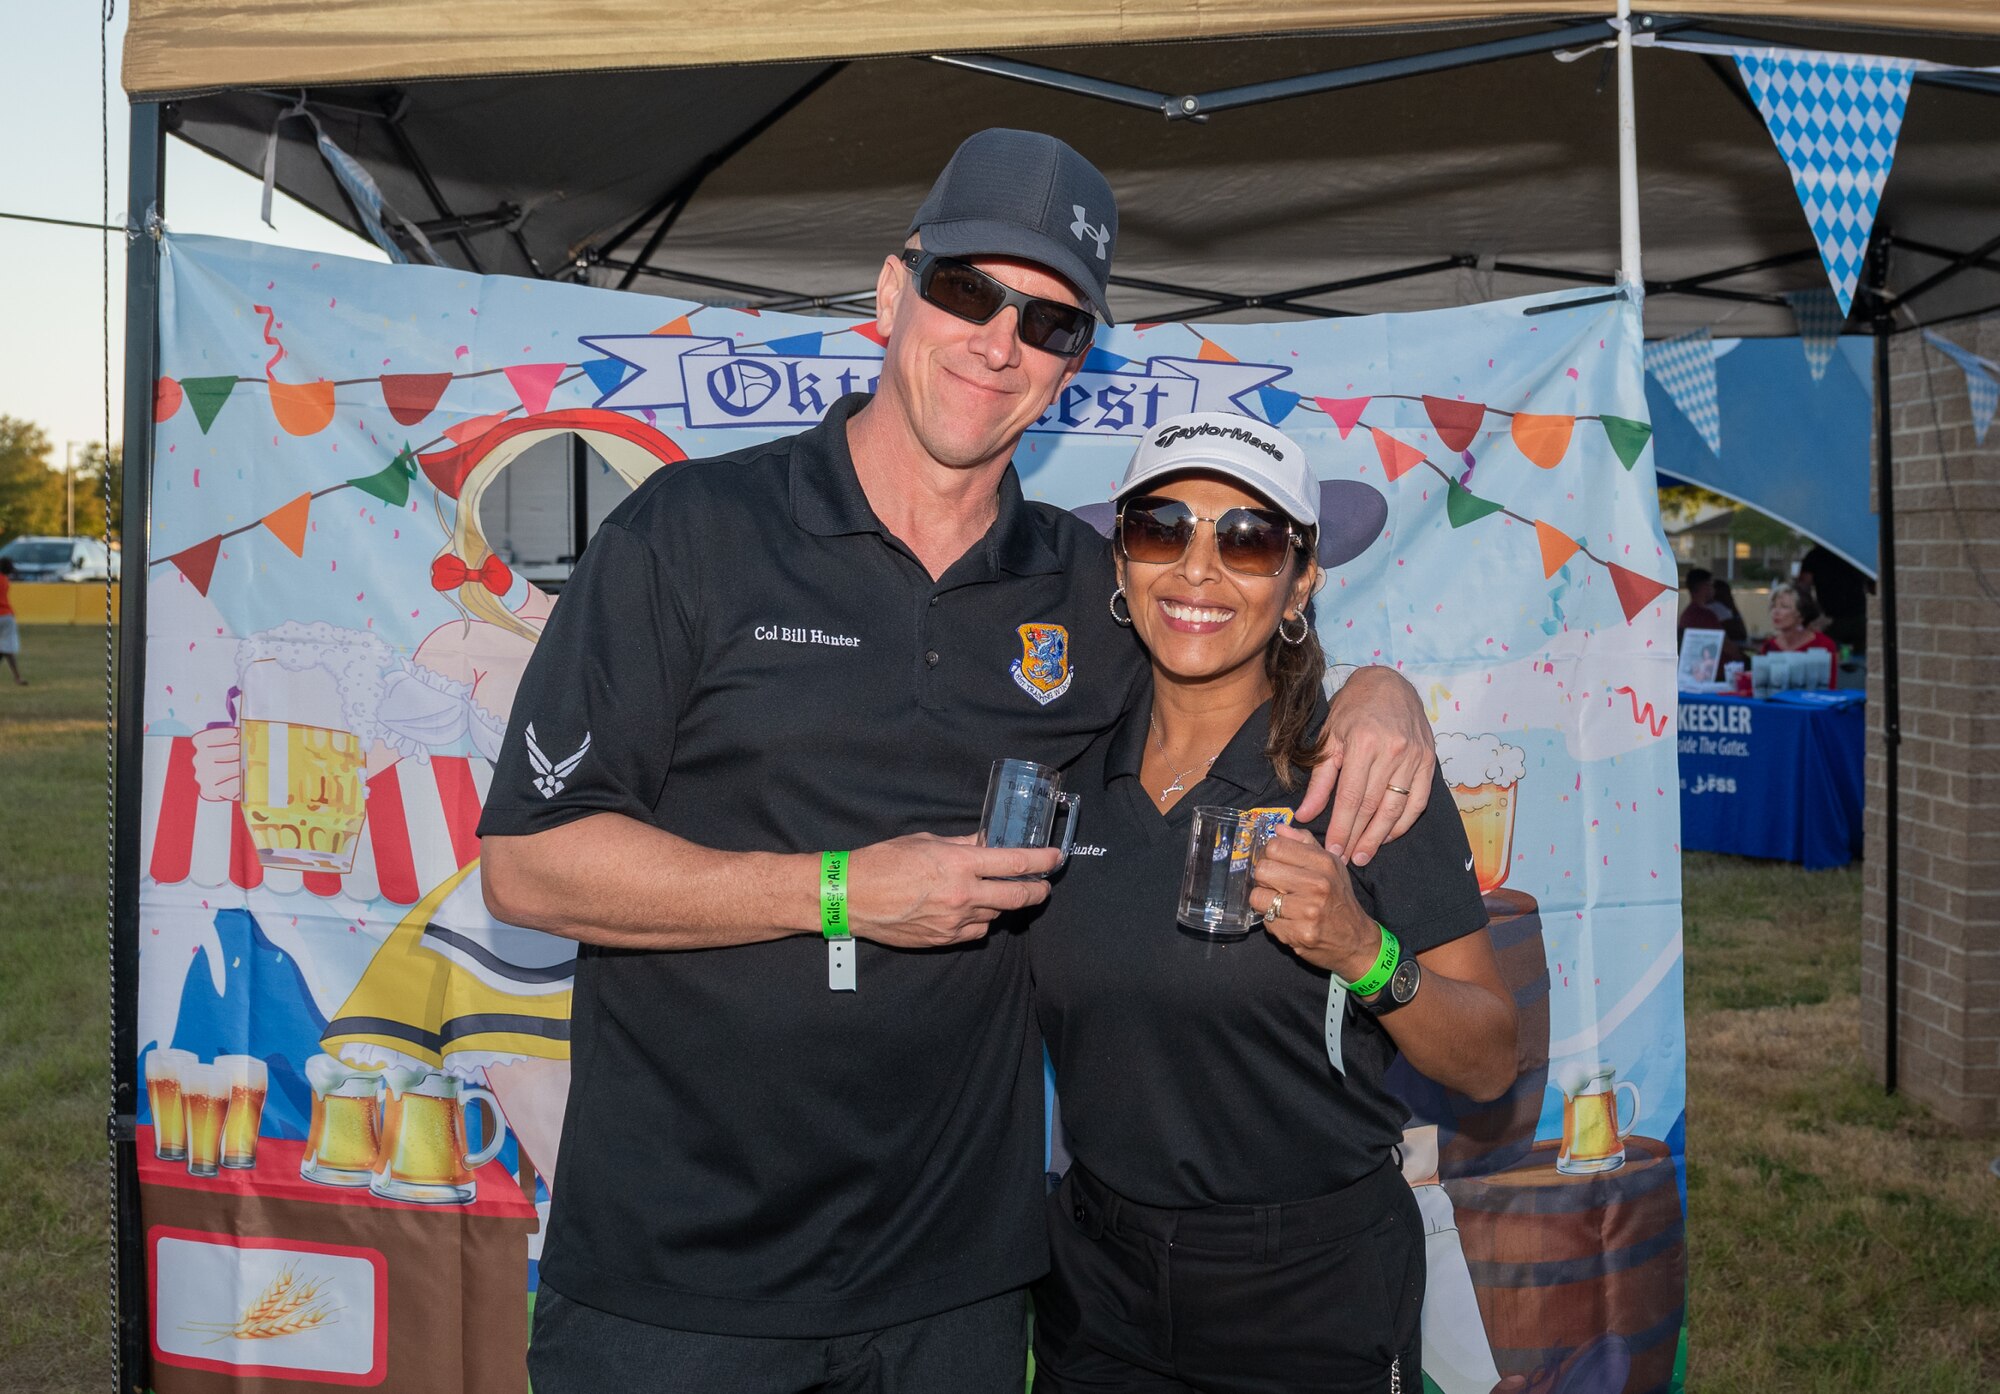 U.S. Air Force Col. William Hunter, 81st Training Wing commander, and his wife, Blanca, pose for a photo during the Tails 'N Ales Annual Shrimp Cook-off outside the Bay Breeze Event Center at Keesler Air Force Base, Mississippi, Oct. 14, 2022. The 81st Force Support Squadron hosted event offered a variety of craft beers for tasting and many teams fighting for the ultimate best shrimp recipe. (U.S. Air Force photo by Andre' Askew)